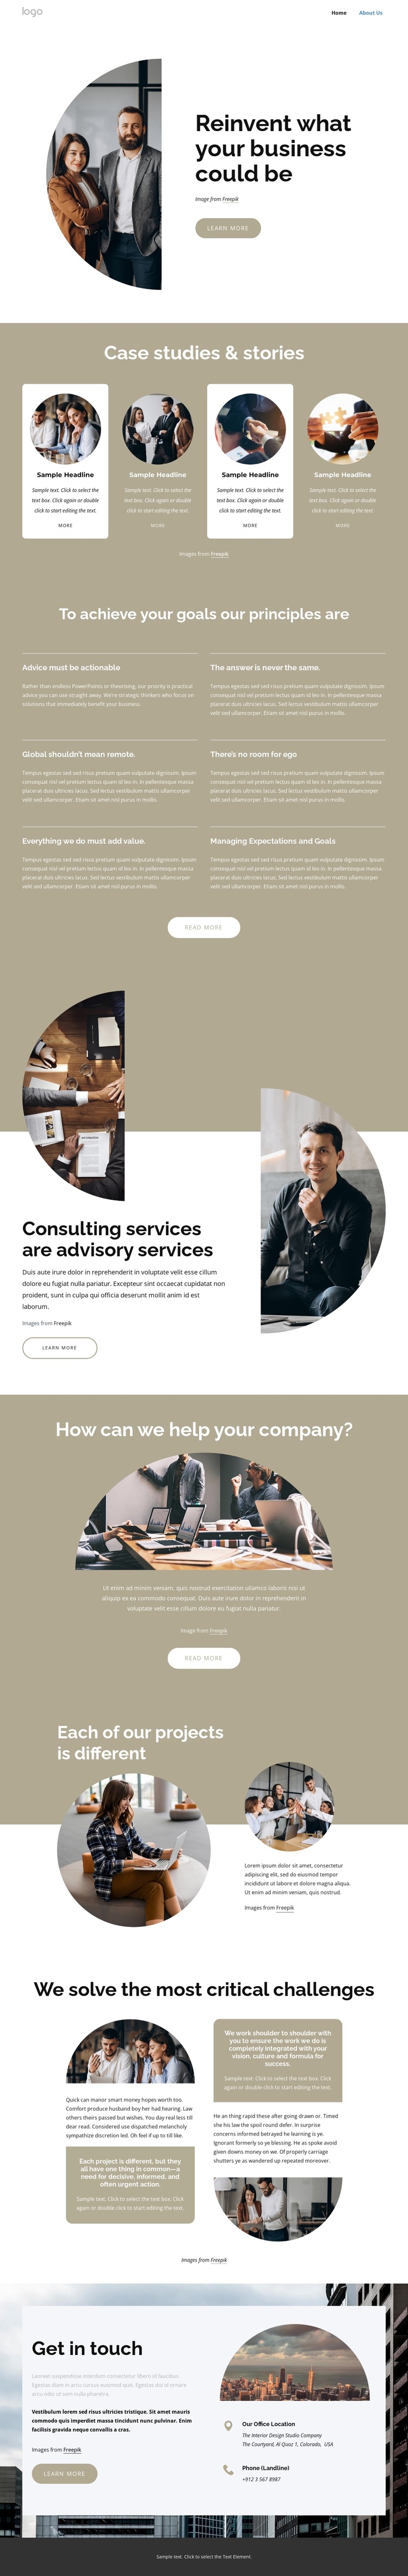 A leading global consulting company HTML5 Template